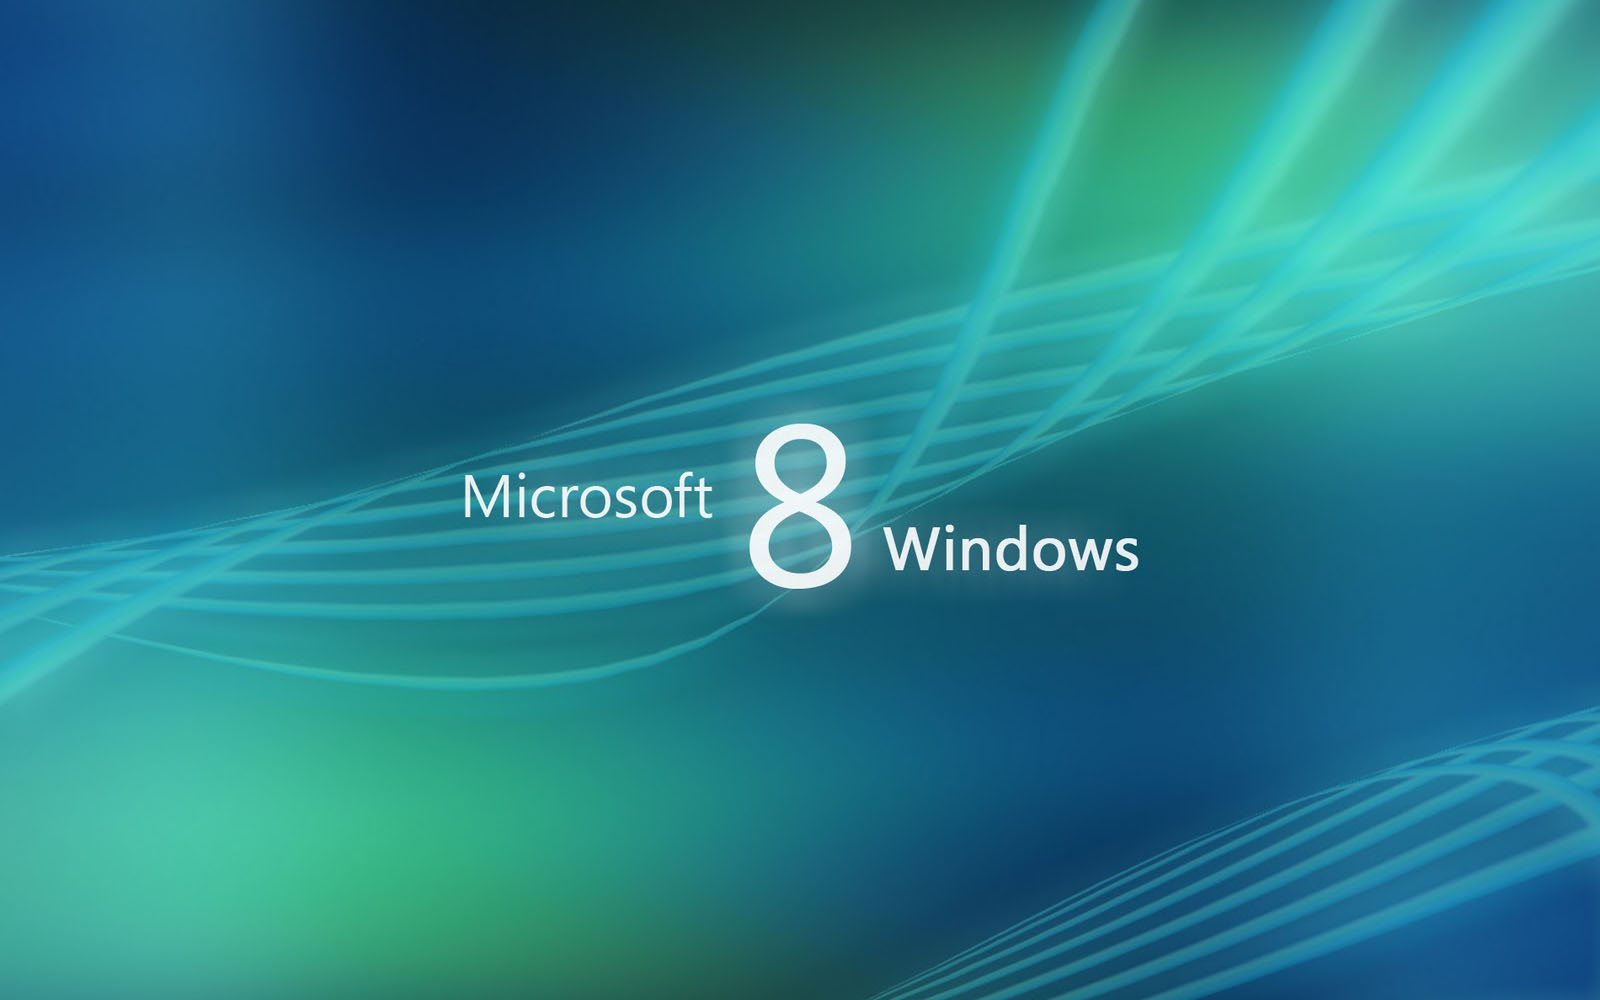  Background Themes Free Windows 8 Background Wallpapers Windows 8